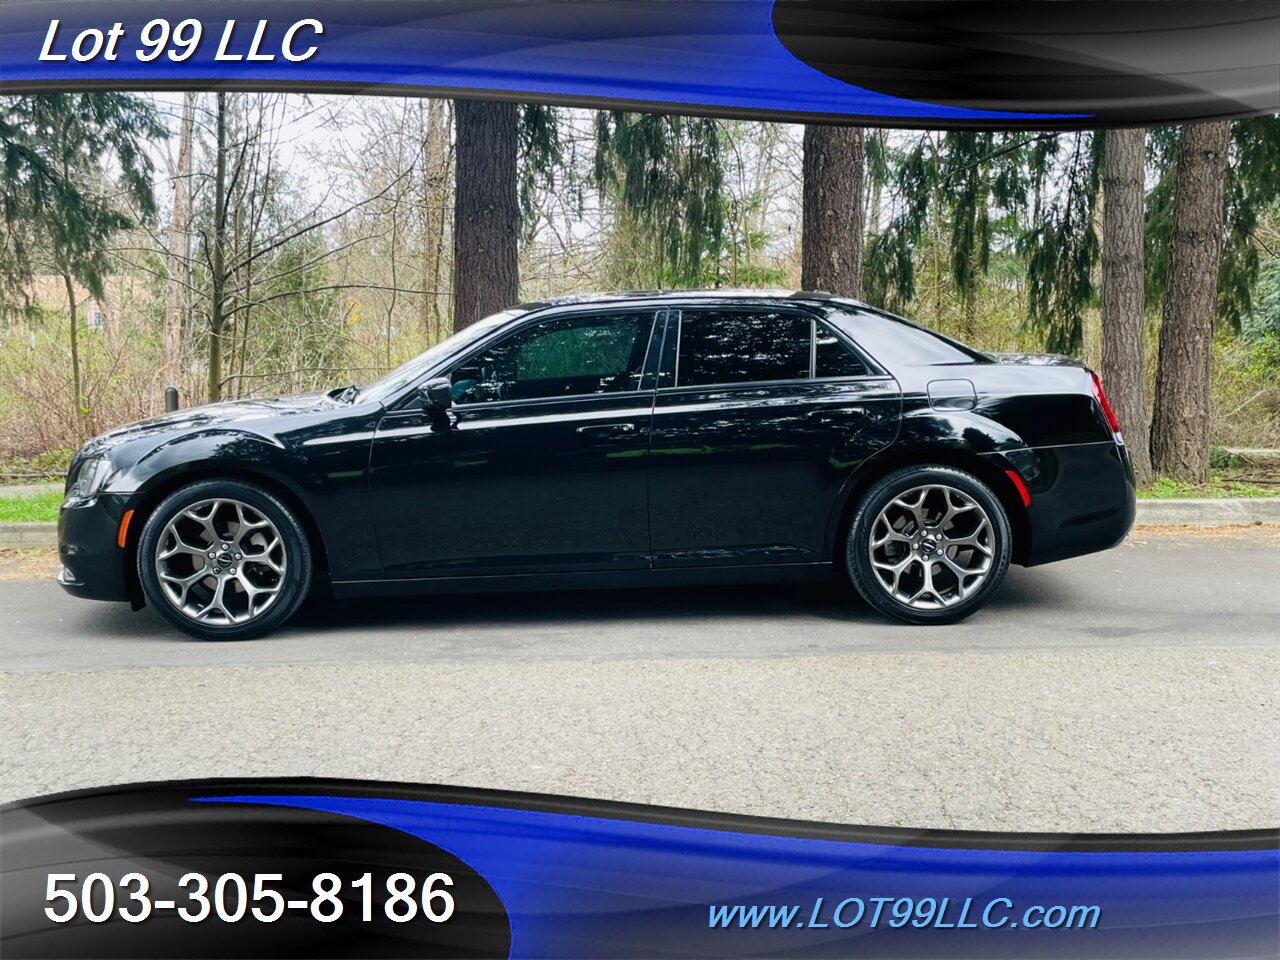 2015 Chrysler 300 Series S Only 86k Miles  Navi Pano HTD Leather 31MPG   - Photo 1 - Milwaukie, OR 97267